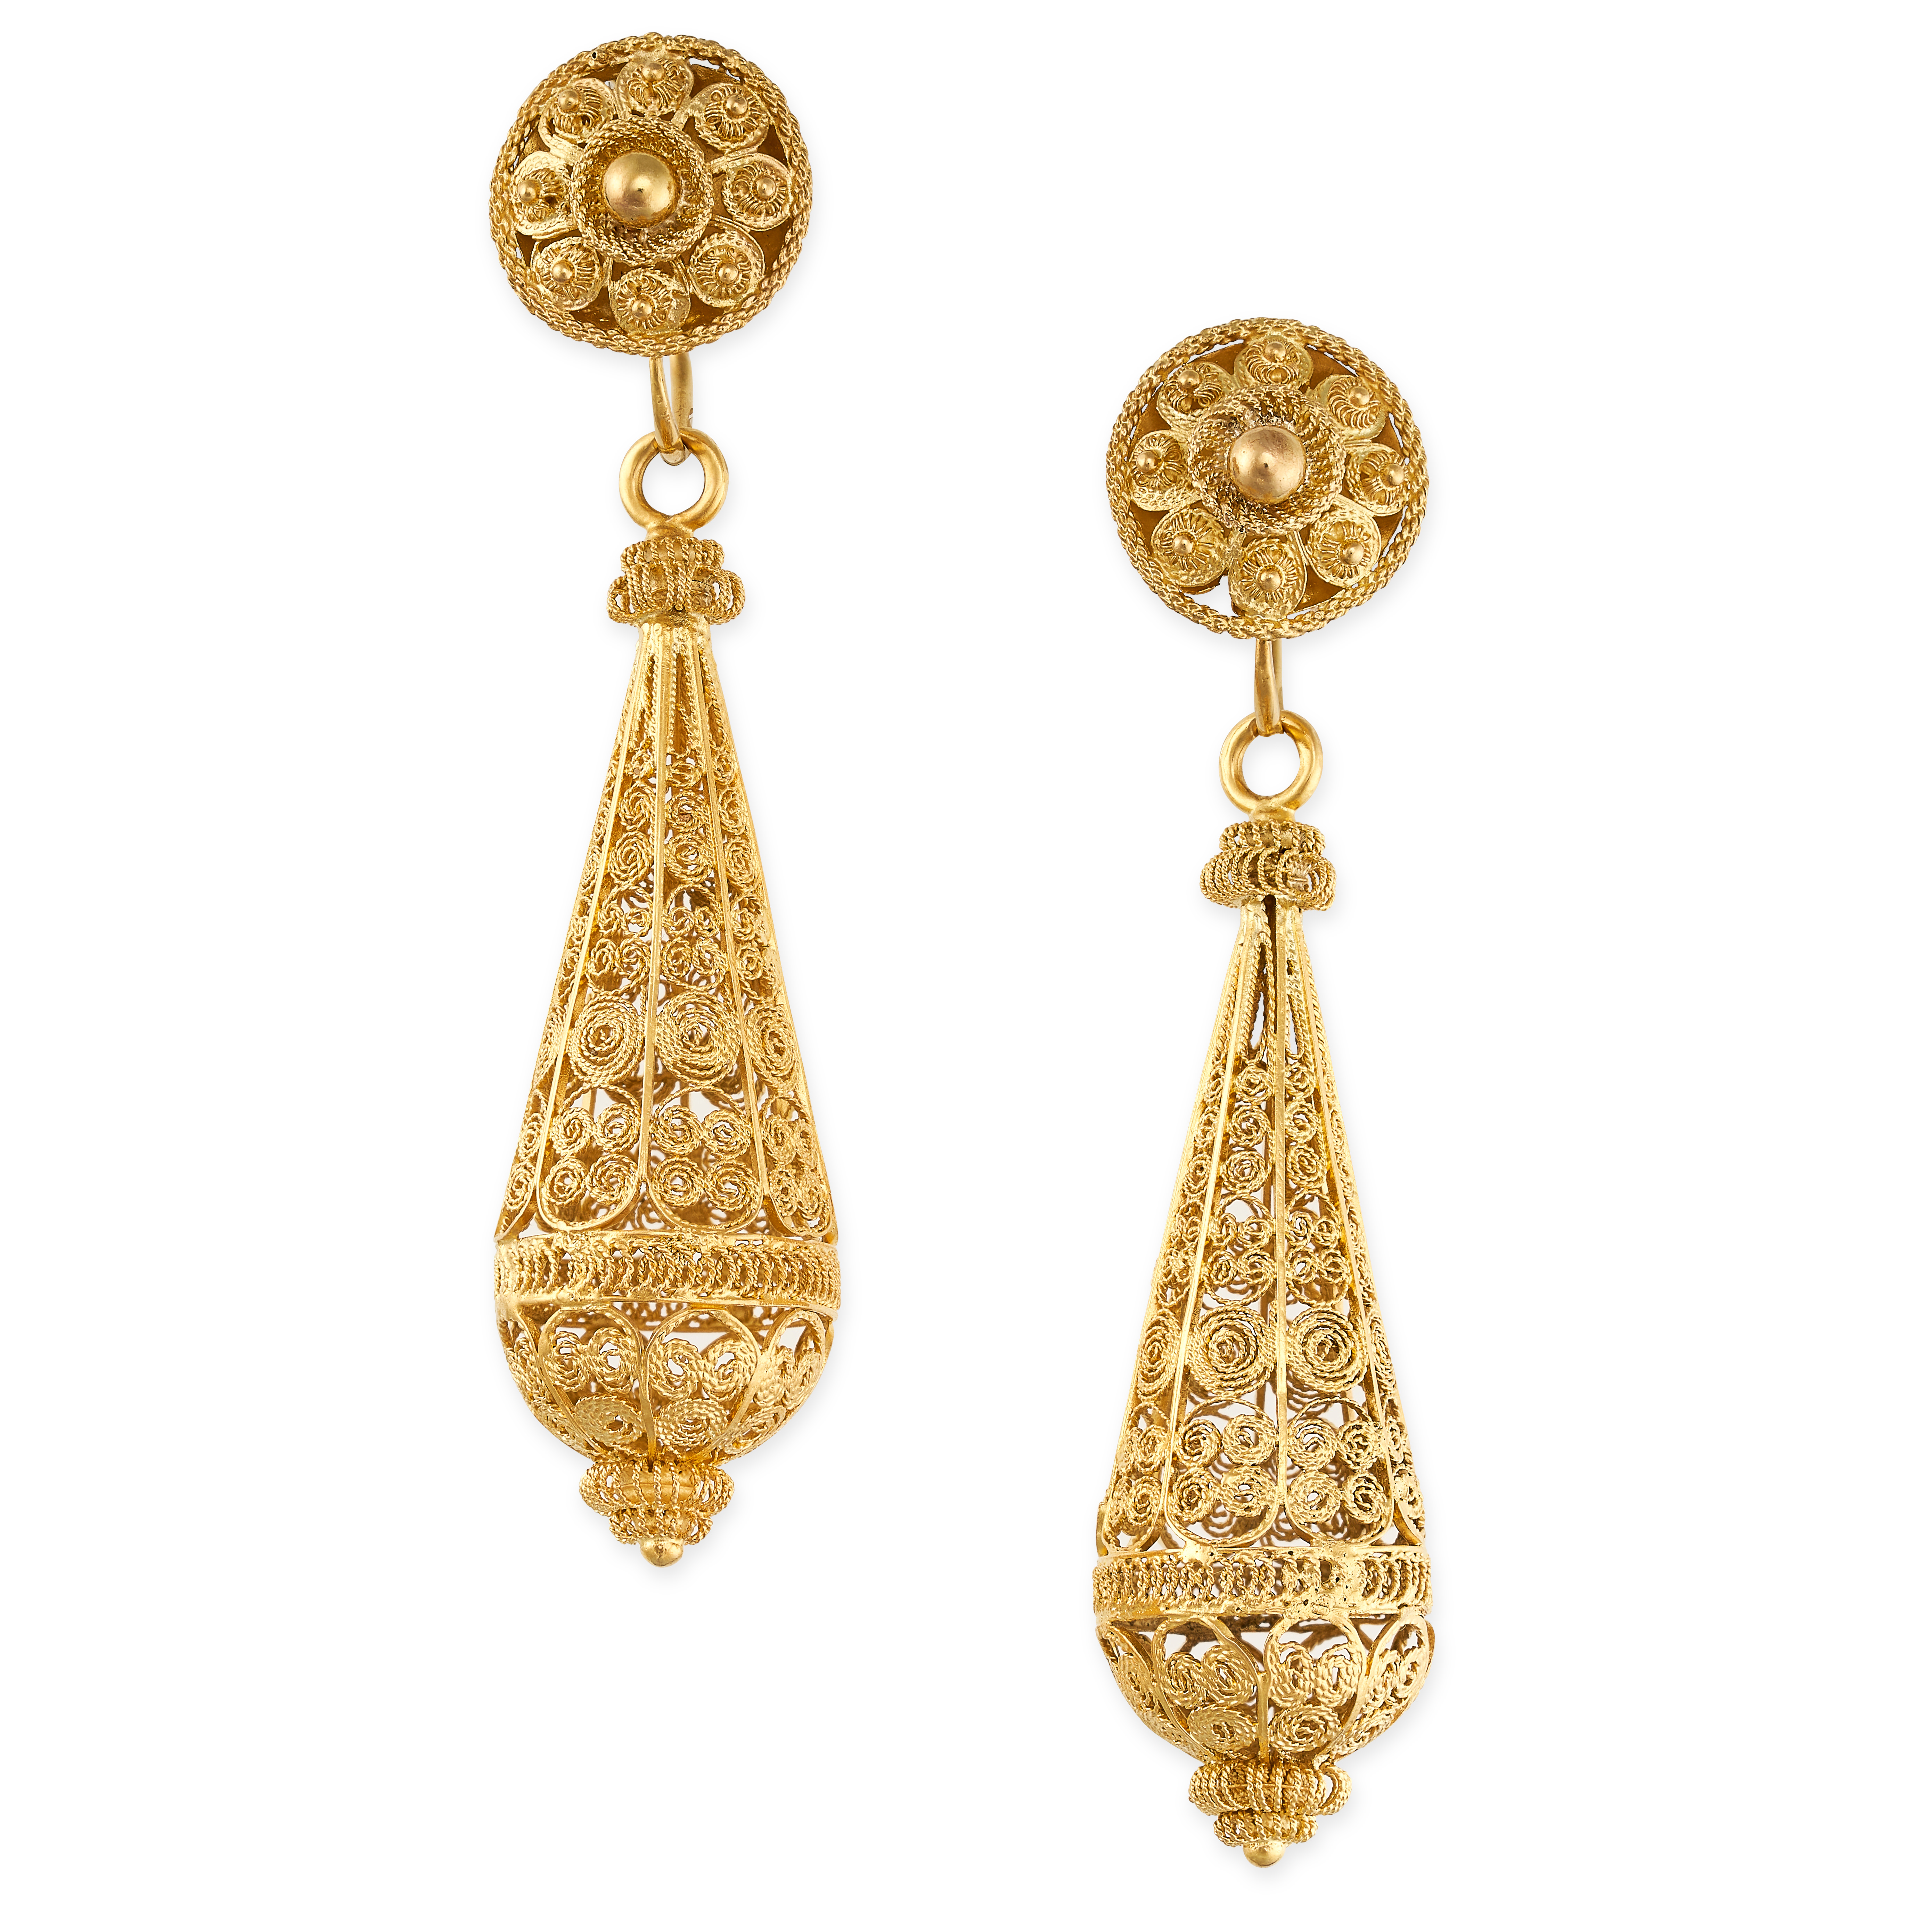 NO RESERVE - A PAIR OF ANTIQUE FILIGREE DROP EARRINGS, 19TH CENTURY  In high carat yellow gold